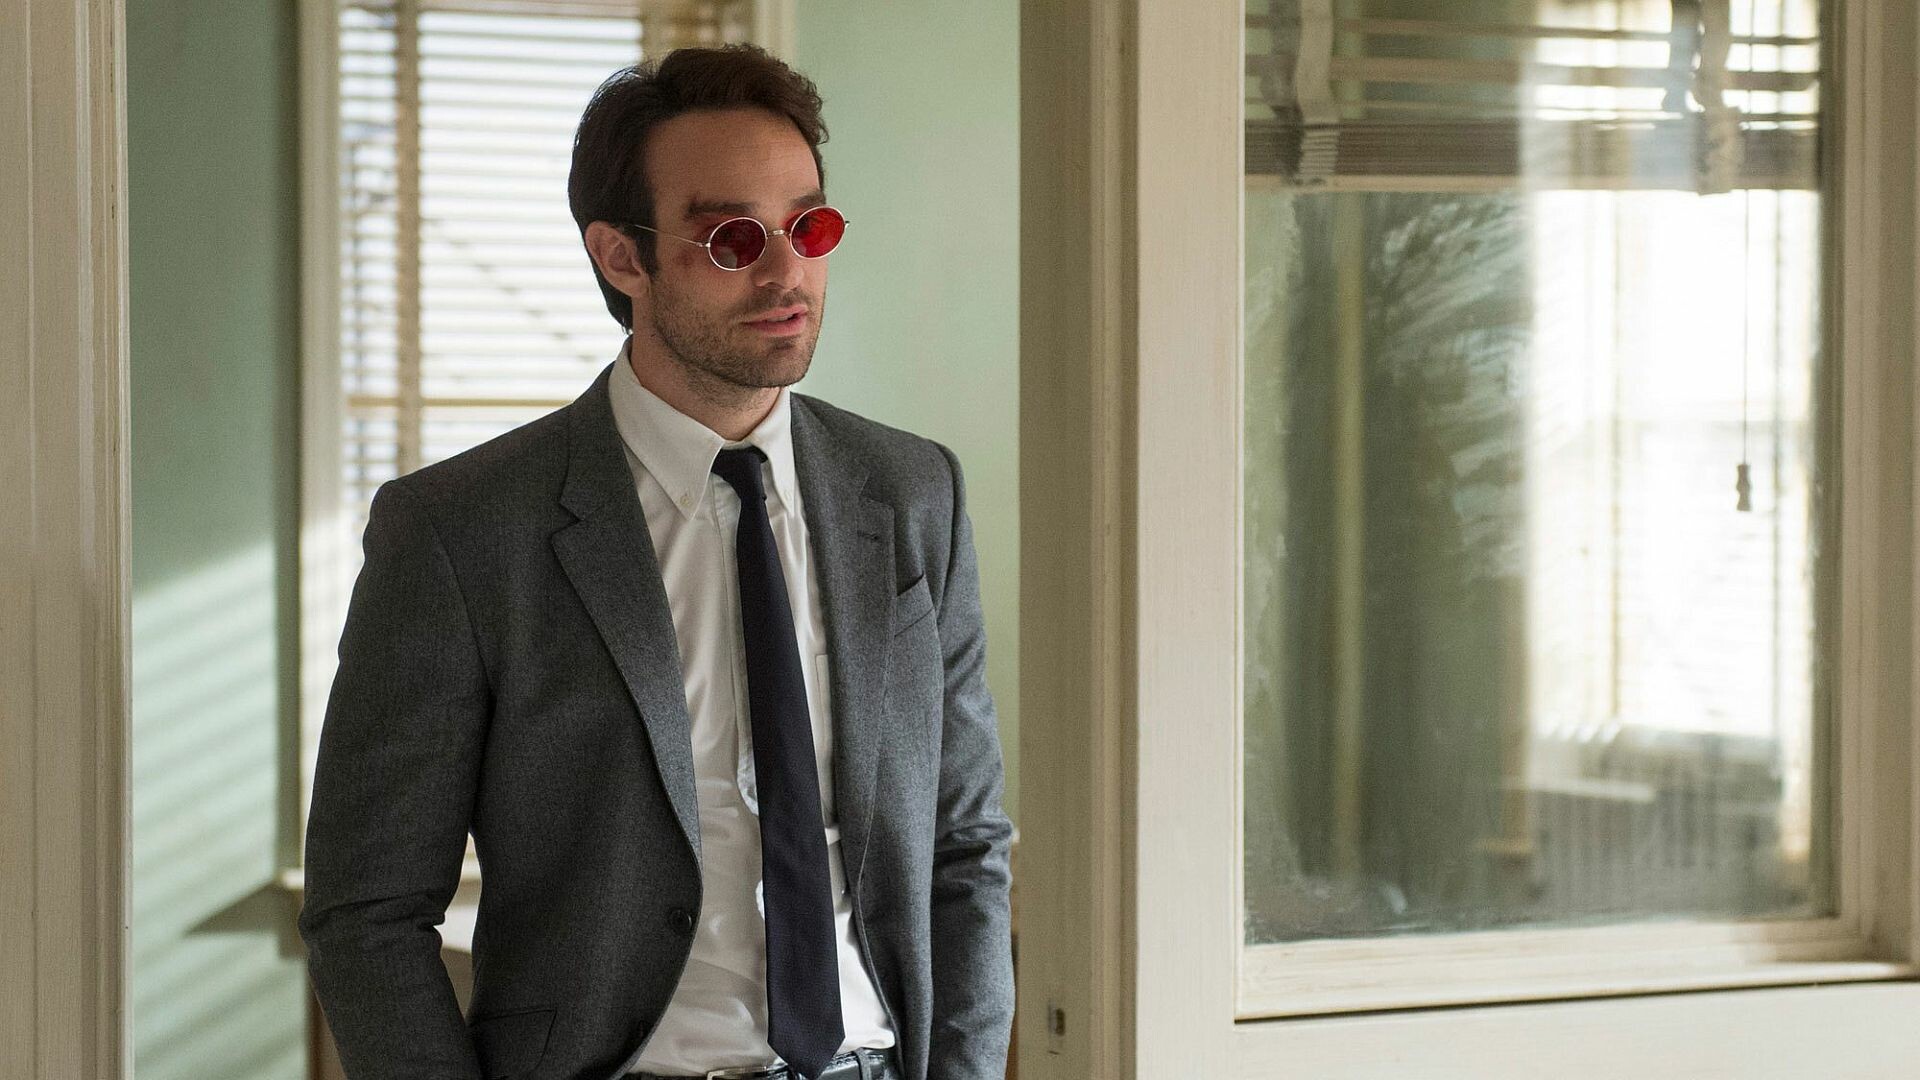 Daredevil (TV Series): Charlie Cox, the first non-American actor to play Matt Murdock in a live-action adaption. 1920x1080 Full HD Wallpaper.